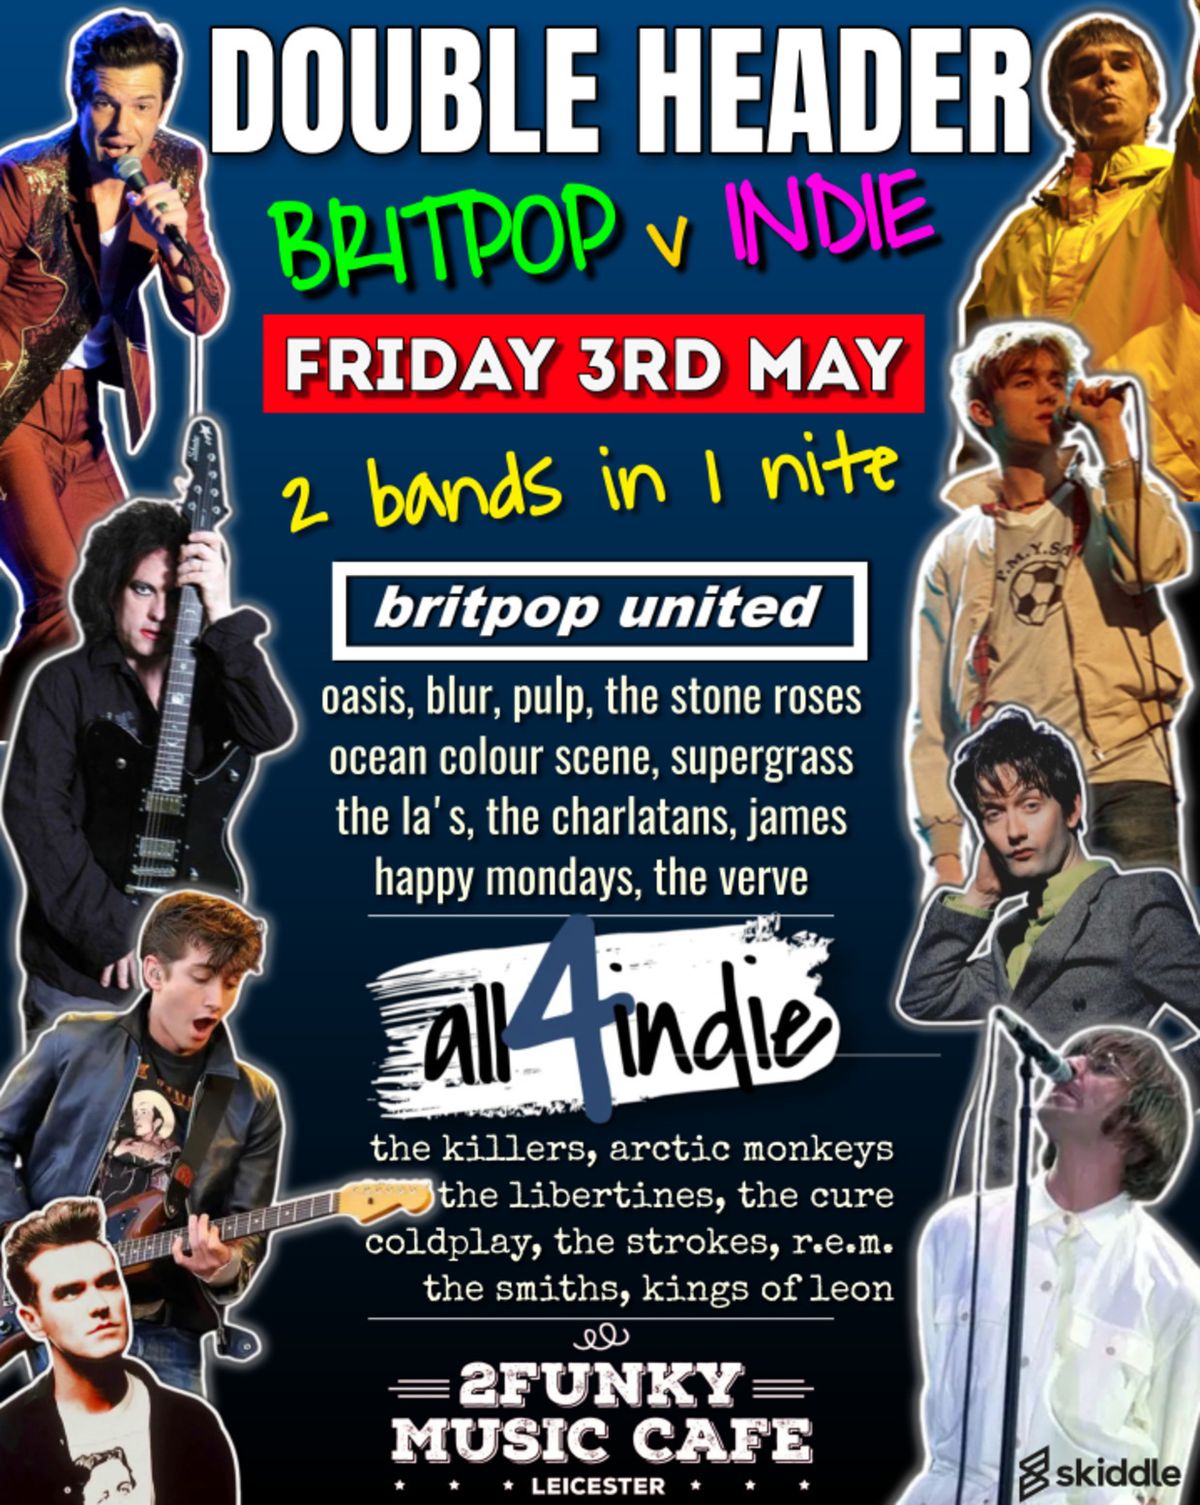 Double Header: INDIE v BRITPOP All4Indie AND Britpop United Live at 2Funky Music Cafe